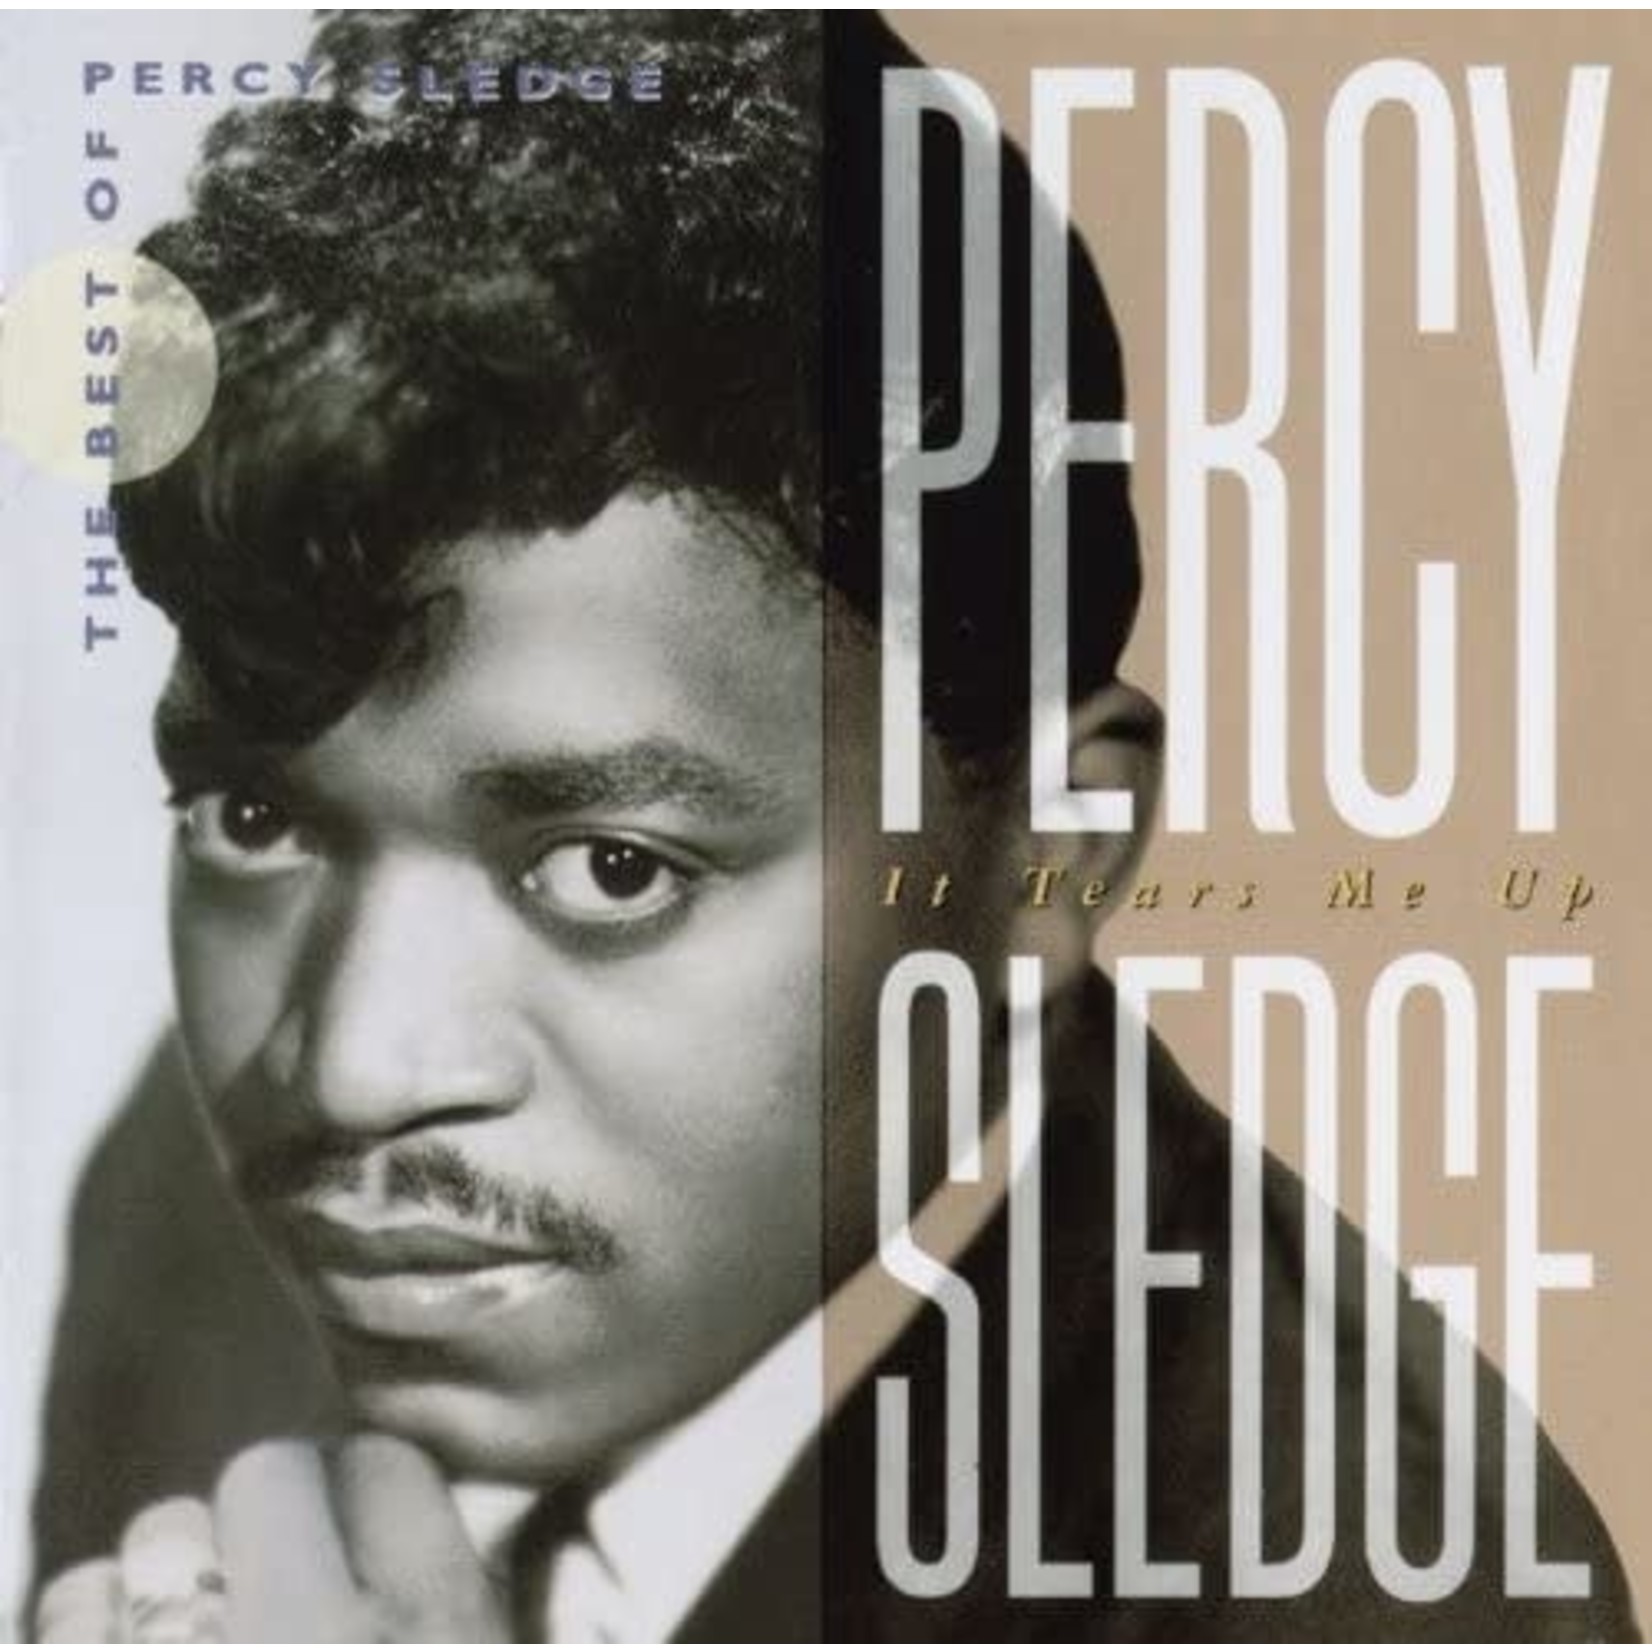 Percy Sledge - It Tears Me Up: The Best Of Percy Sledge [USED CD]